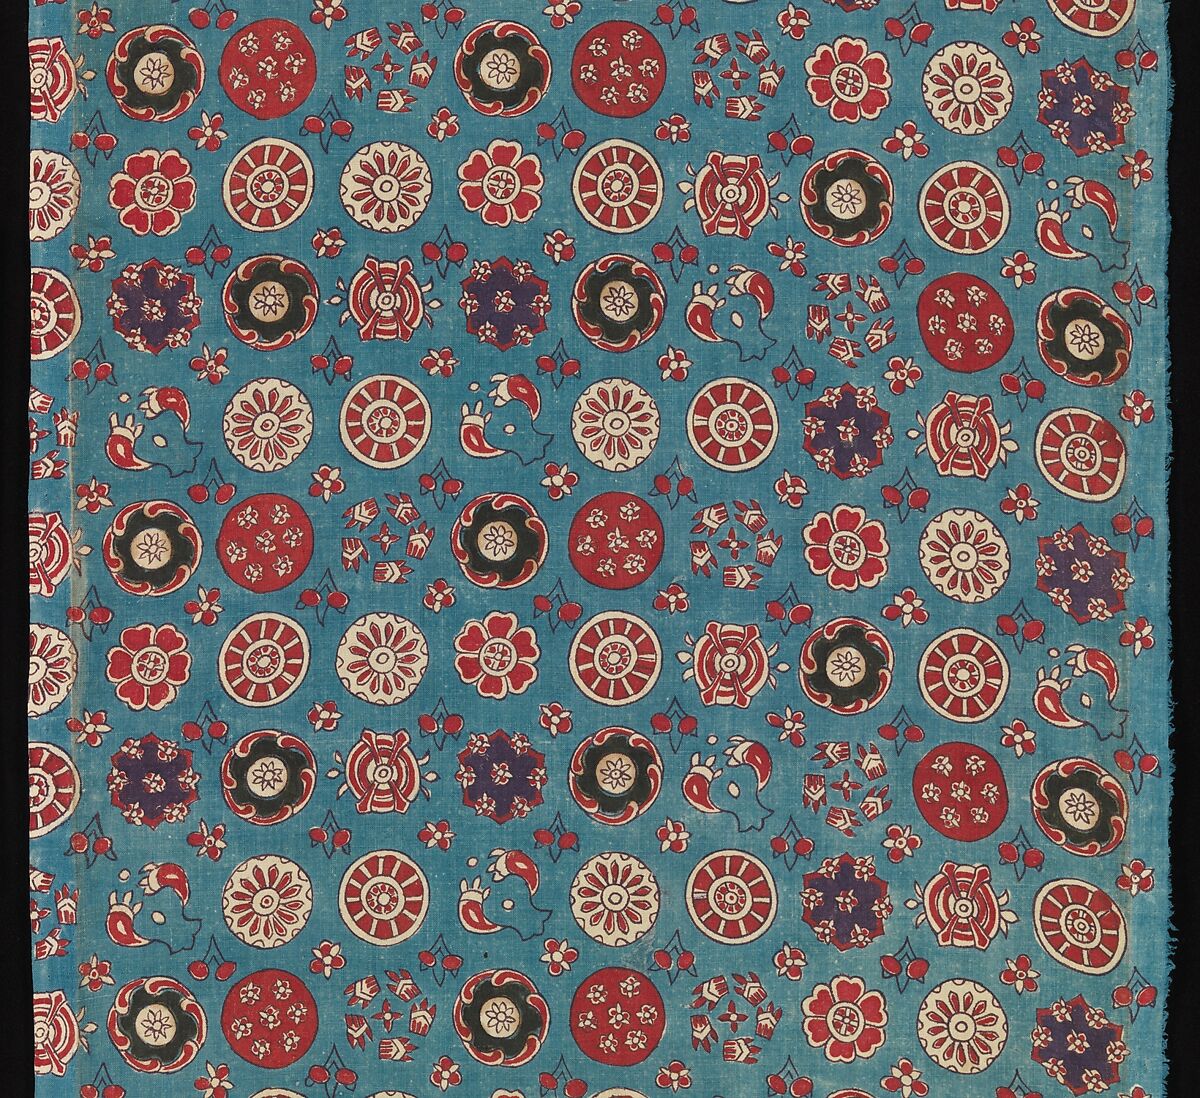 Sarasa with Small Rosettes, Cotton (painted resist and mordant, dyed), India (Coromandel Coast), for the Japanese market 